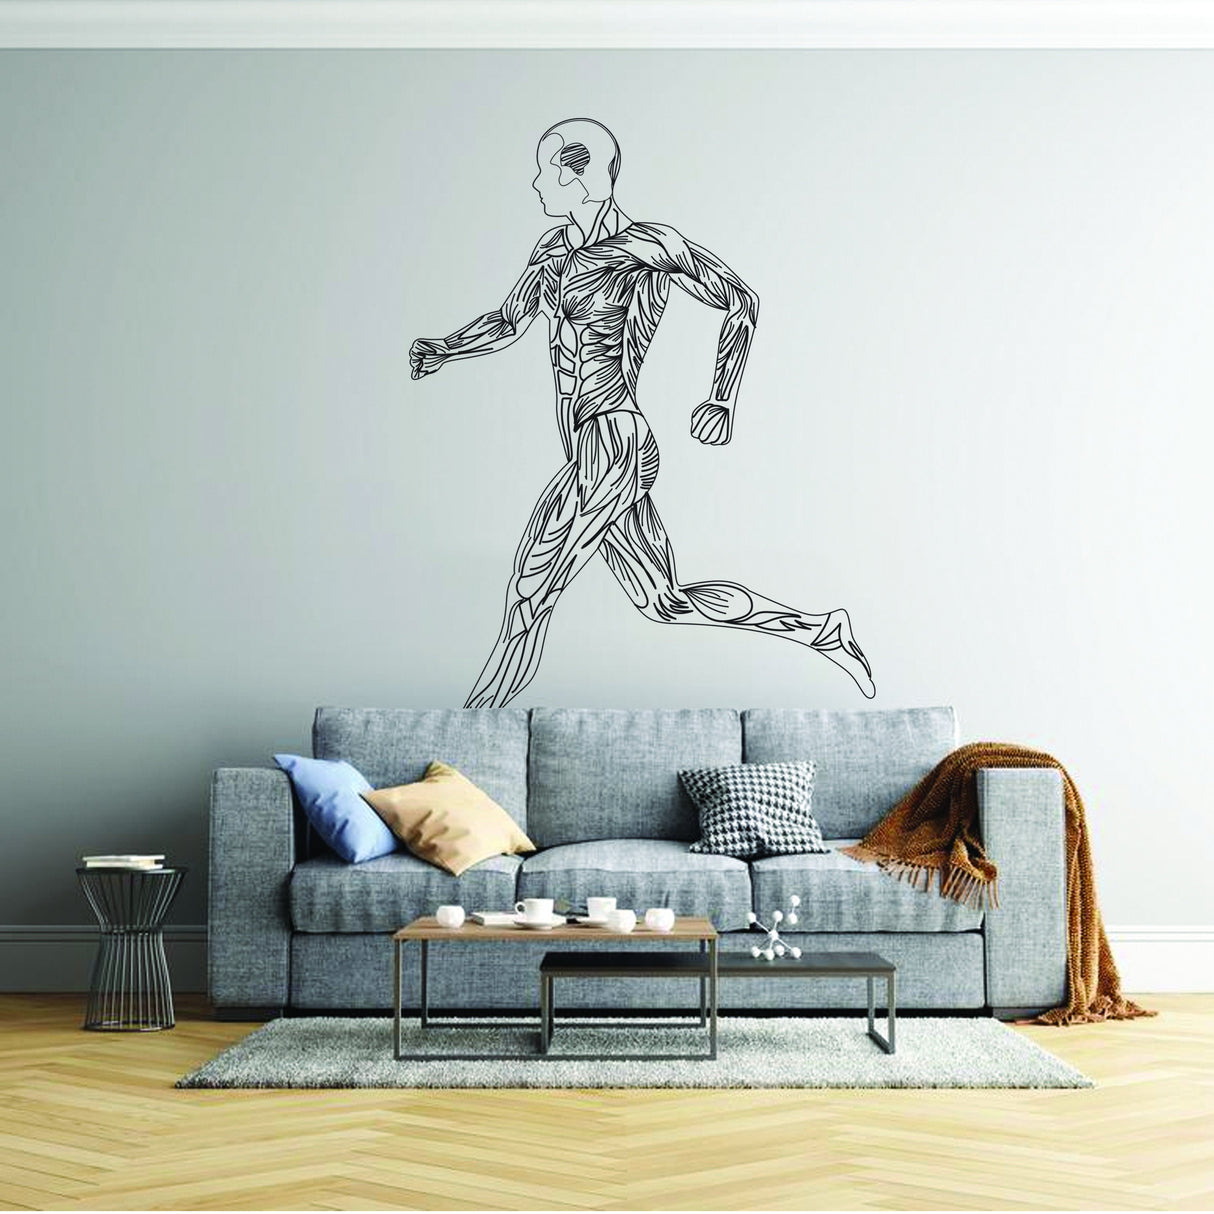 Mens Body Siluette Wall Decal - Sexy Fitness Silhouette Art Sticker For Office Gym Club Decor